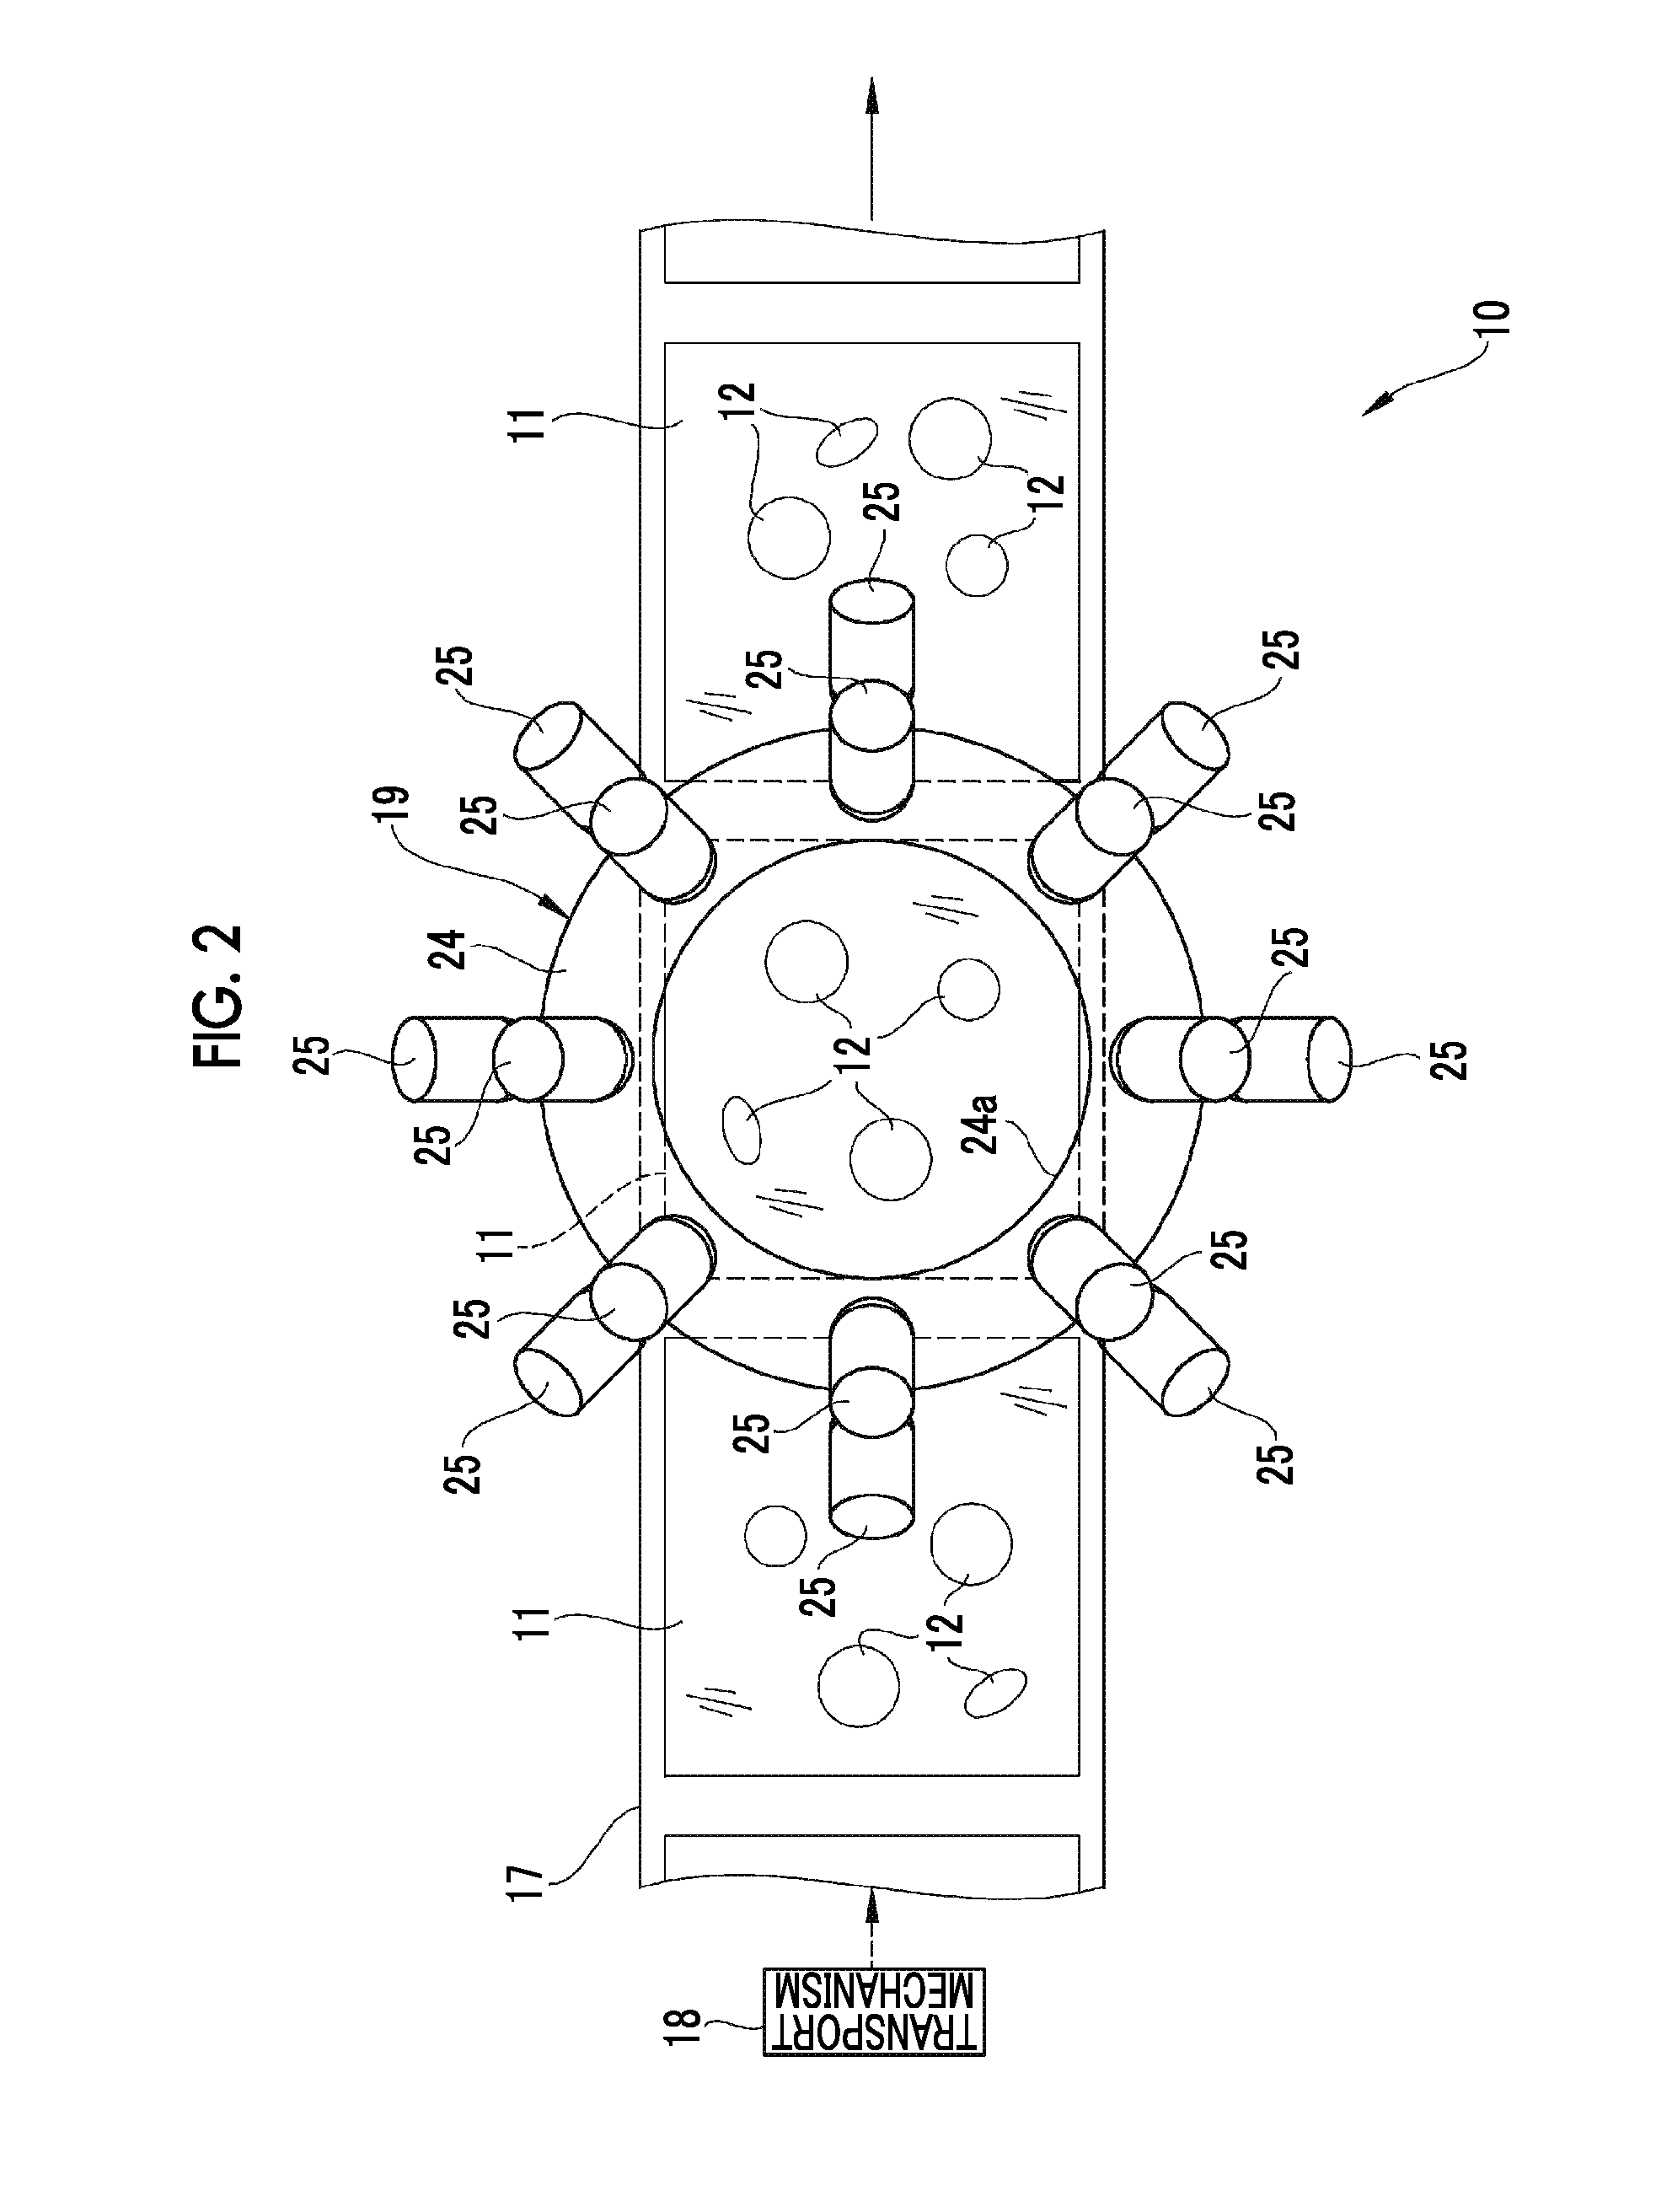 Drug recognition device and method